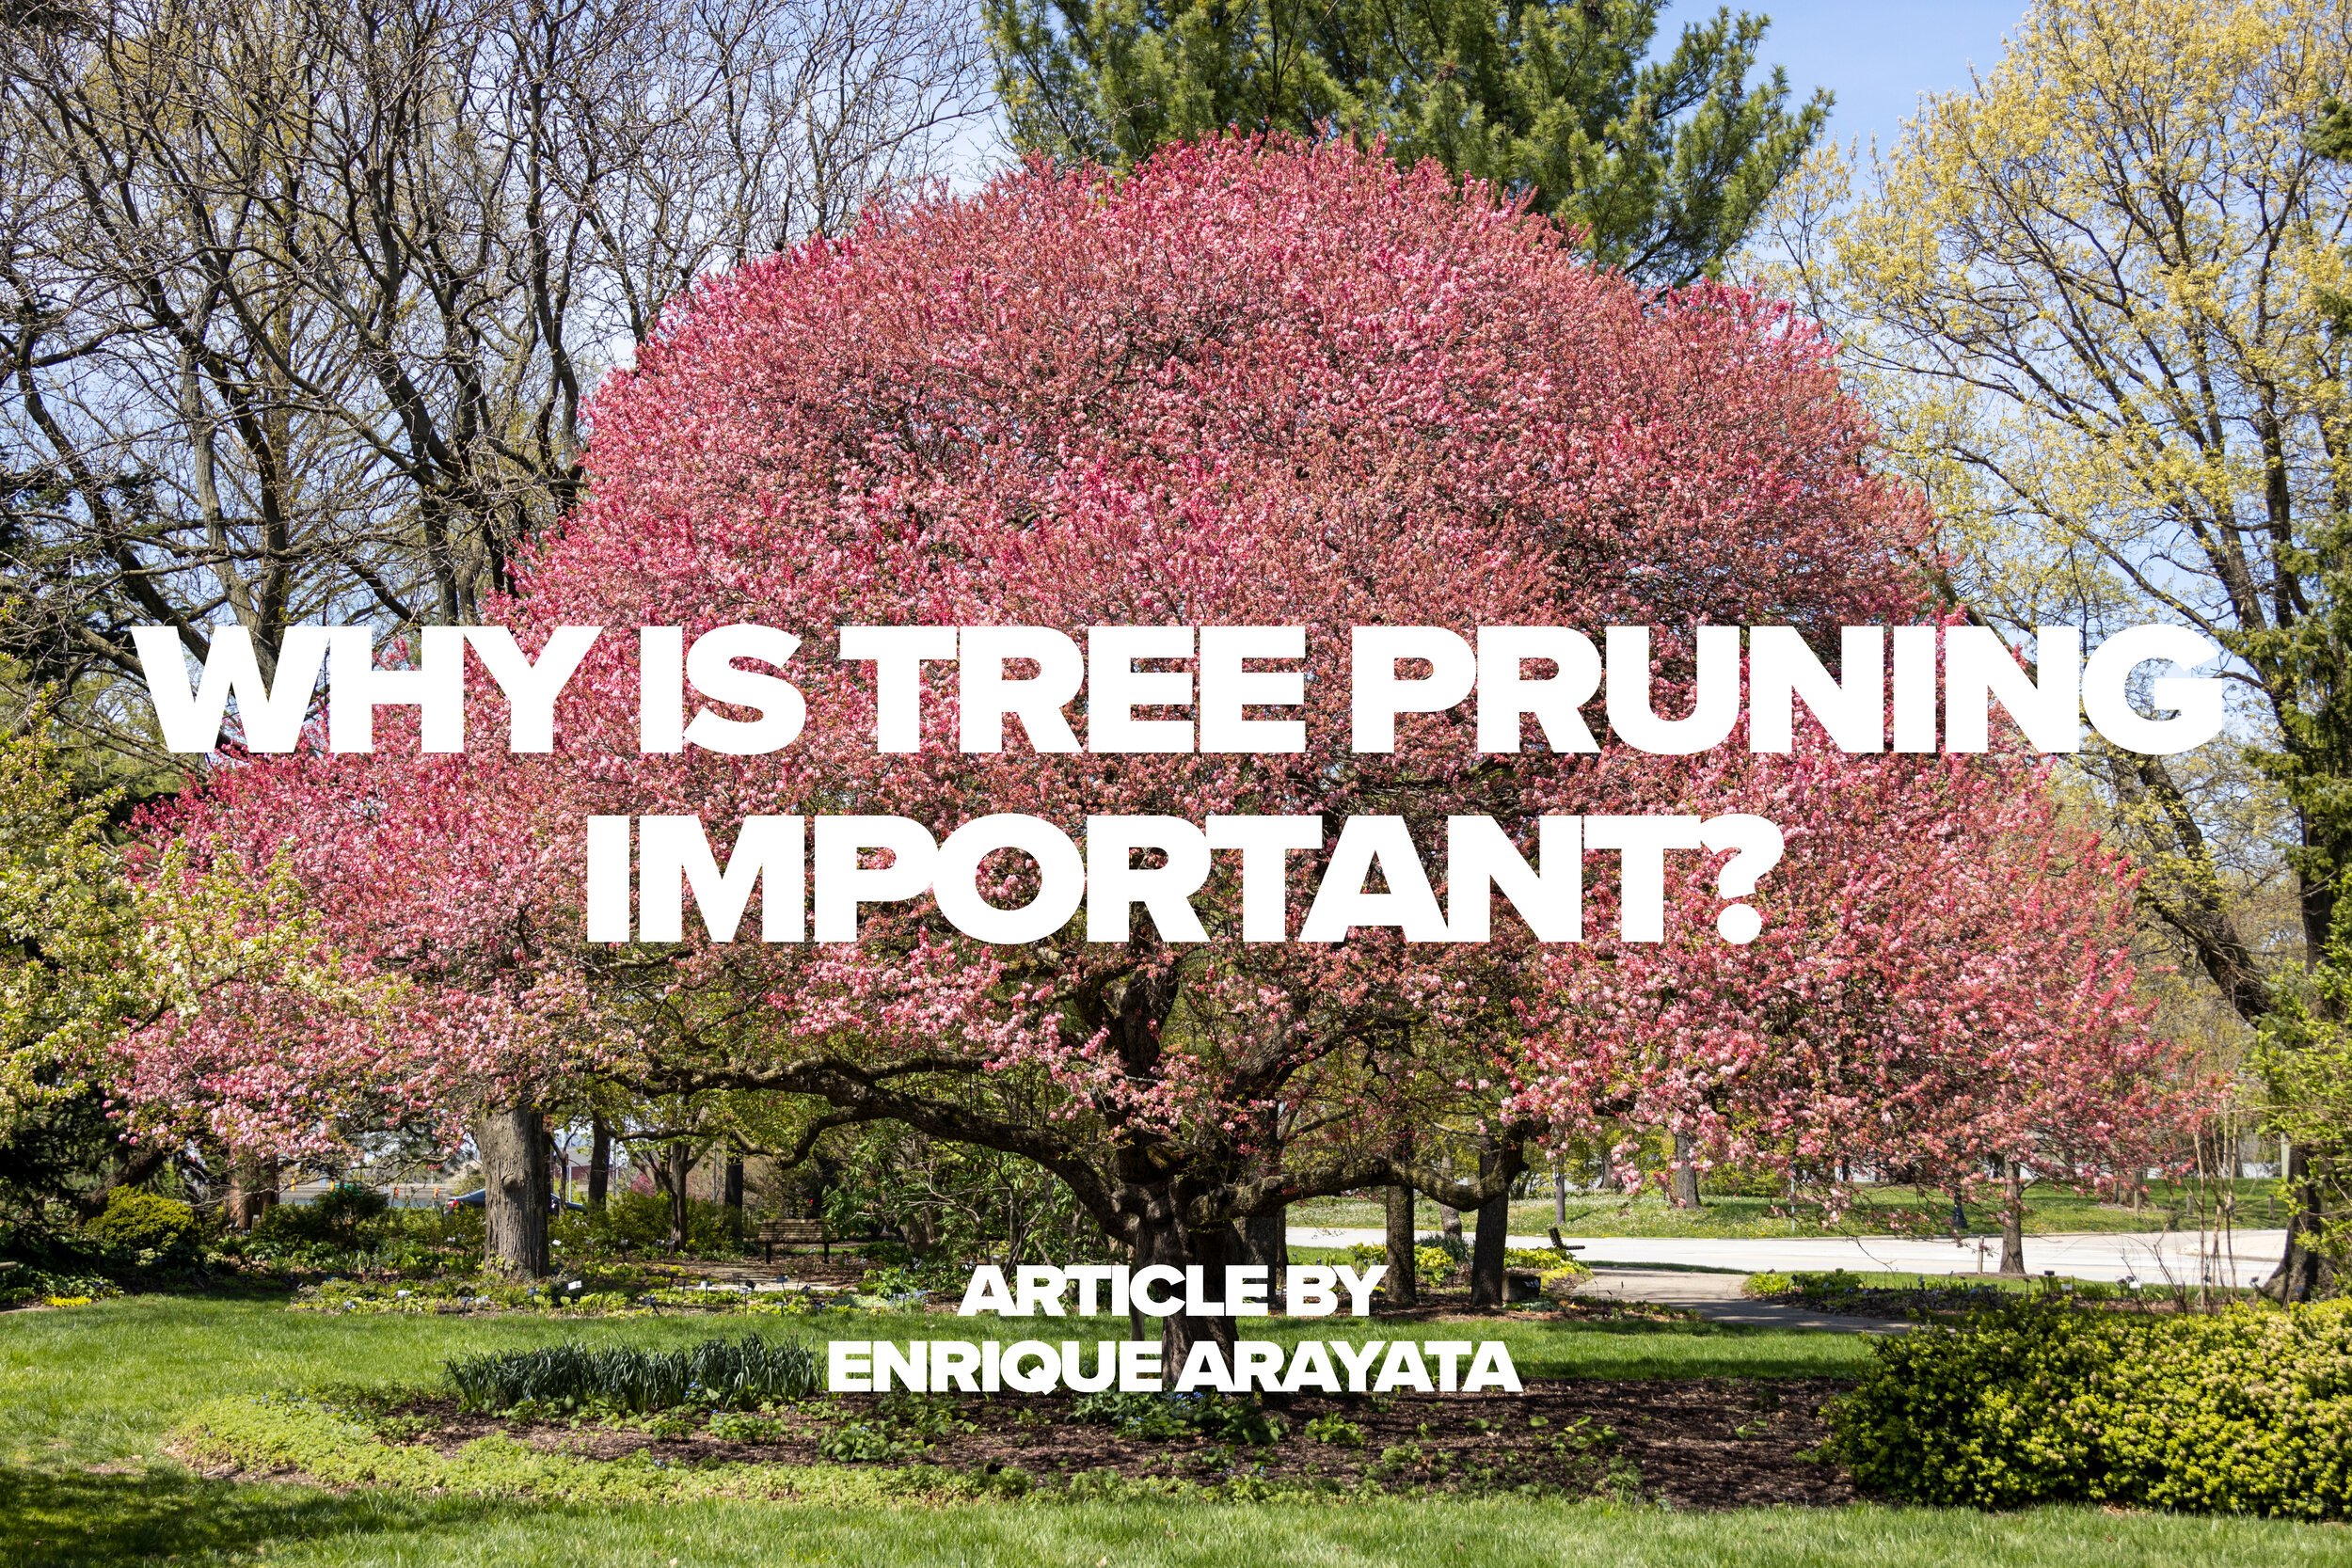 Why is Tree Pruning Important Header.jpeg